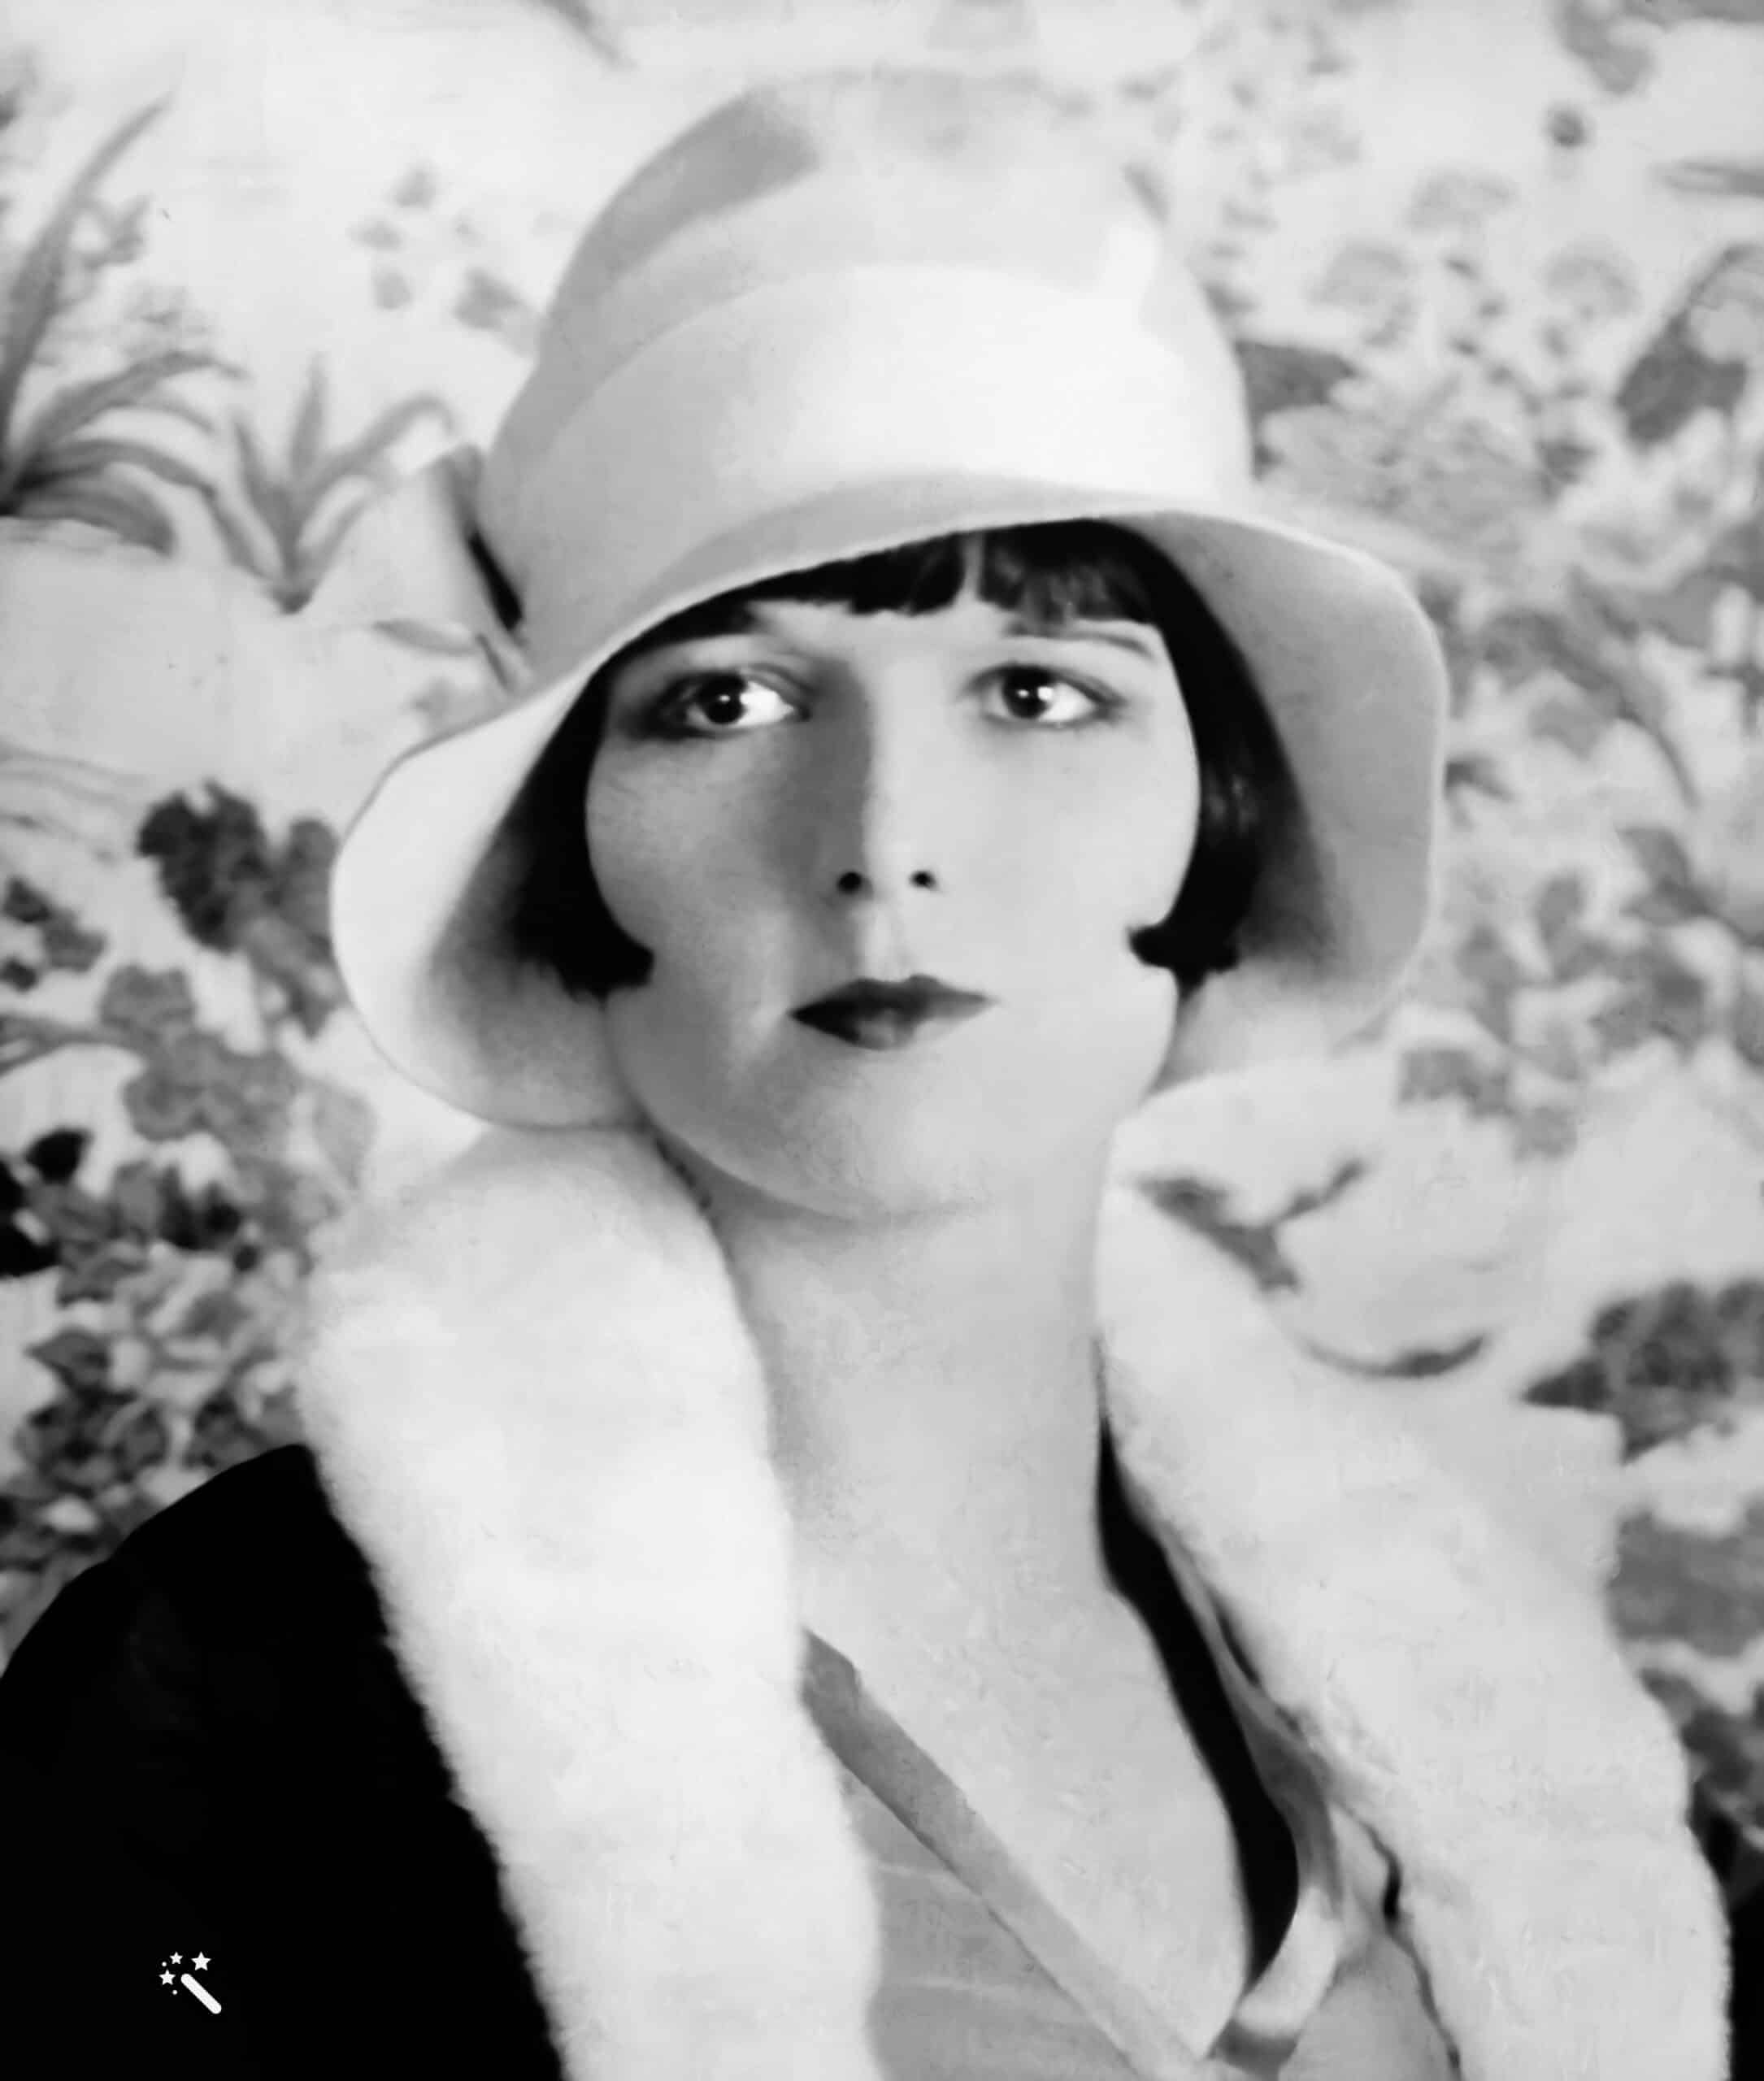 Not All Flappers Wanted to Be Flat in the 1920s